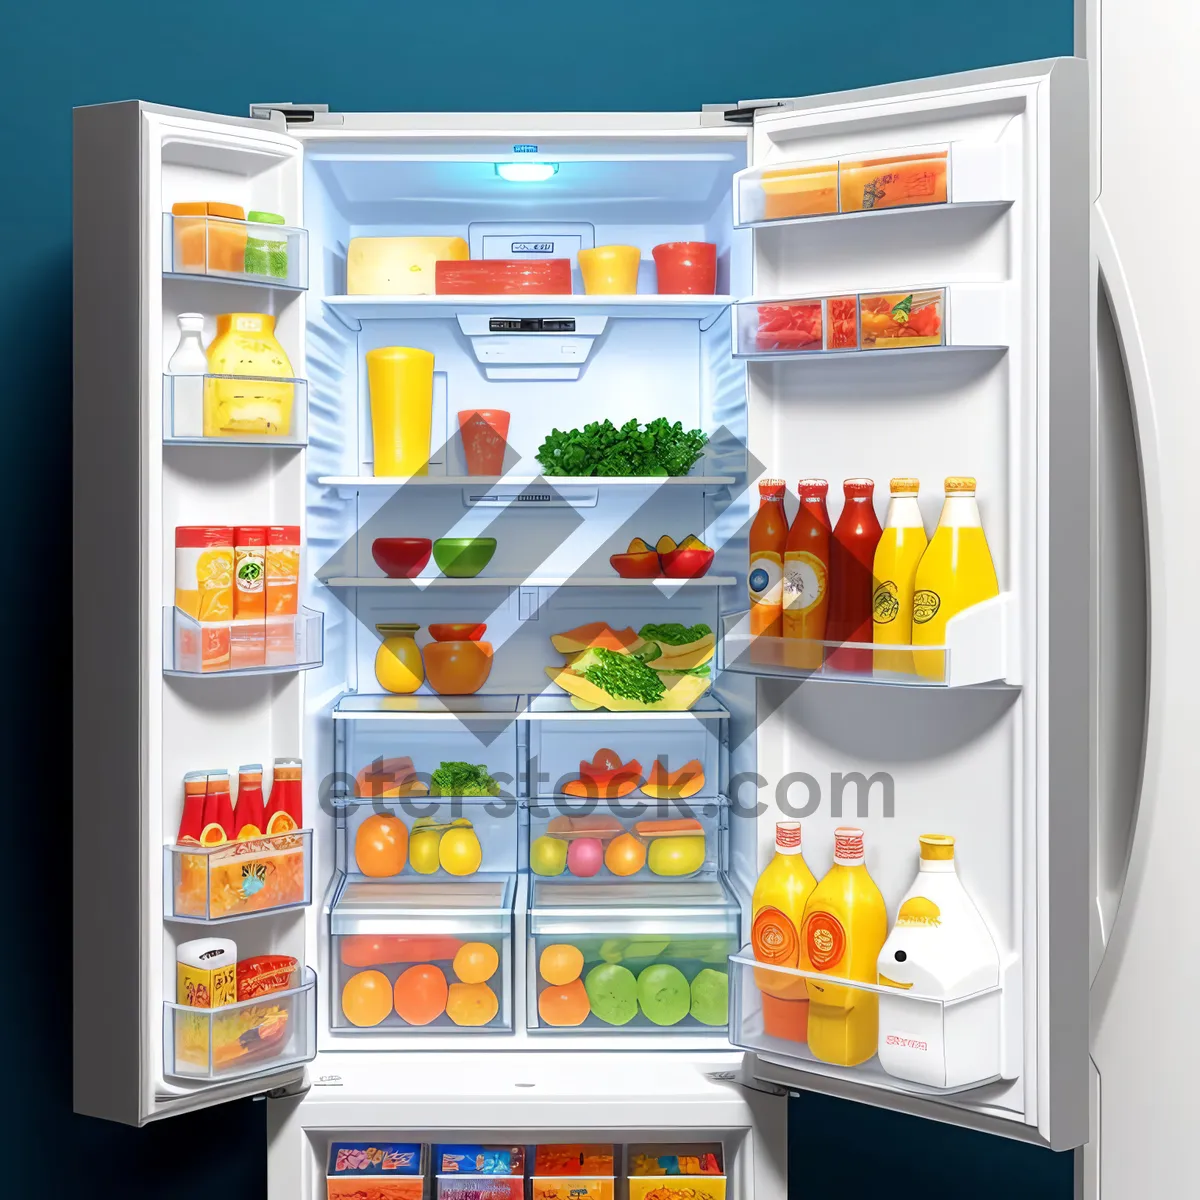 Picture of White Goods Refrigerator: Home Appliance for Durables and Convenience.